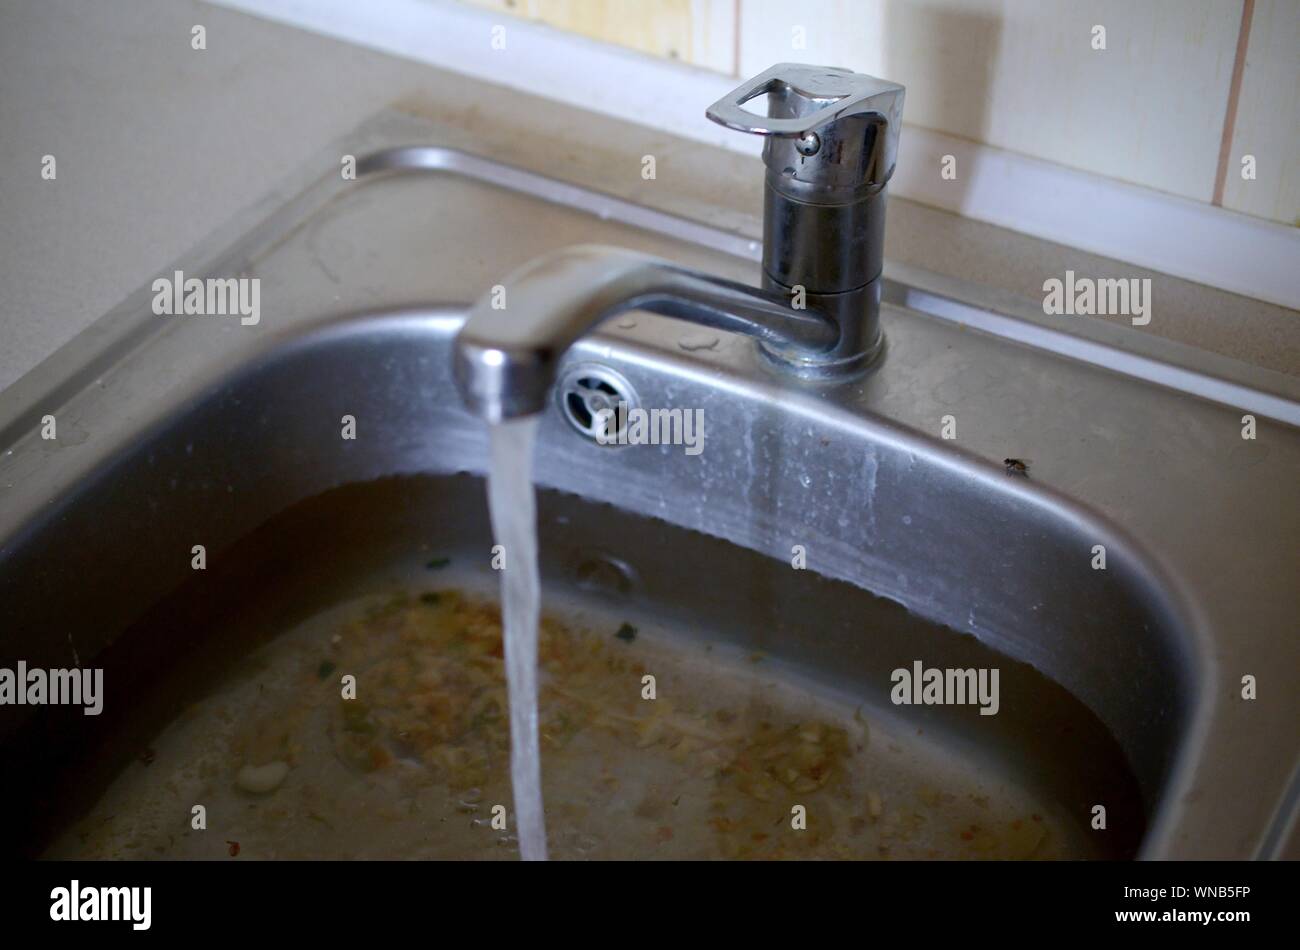 sink overflow clogged